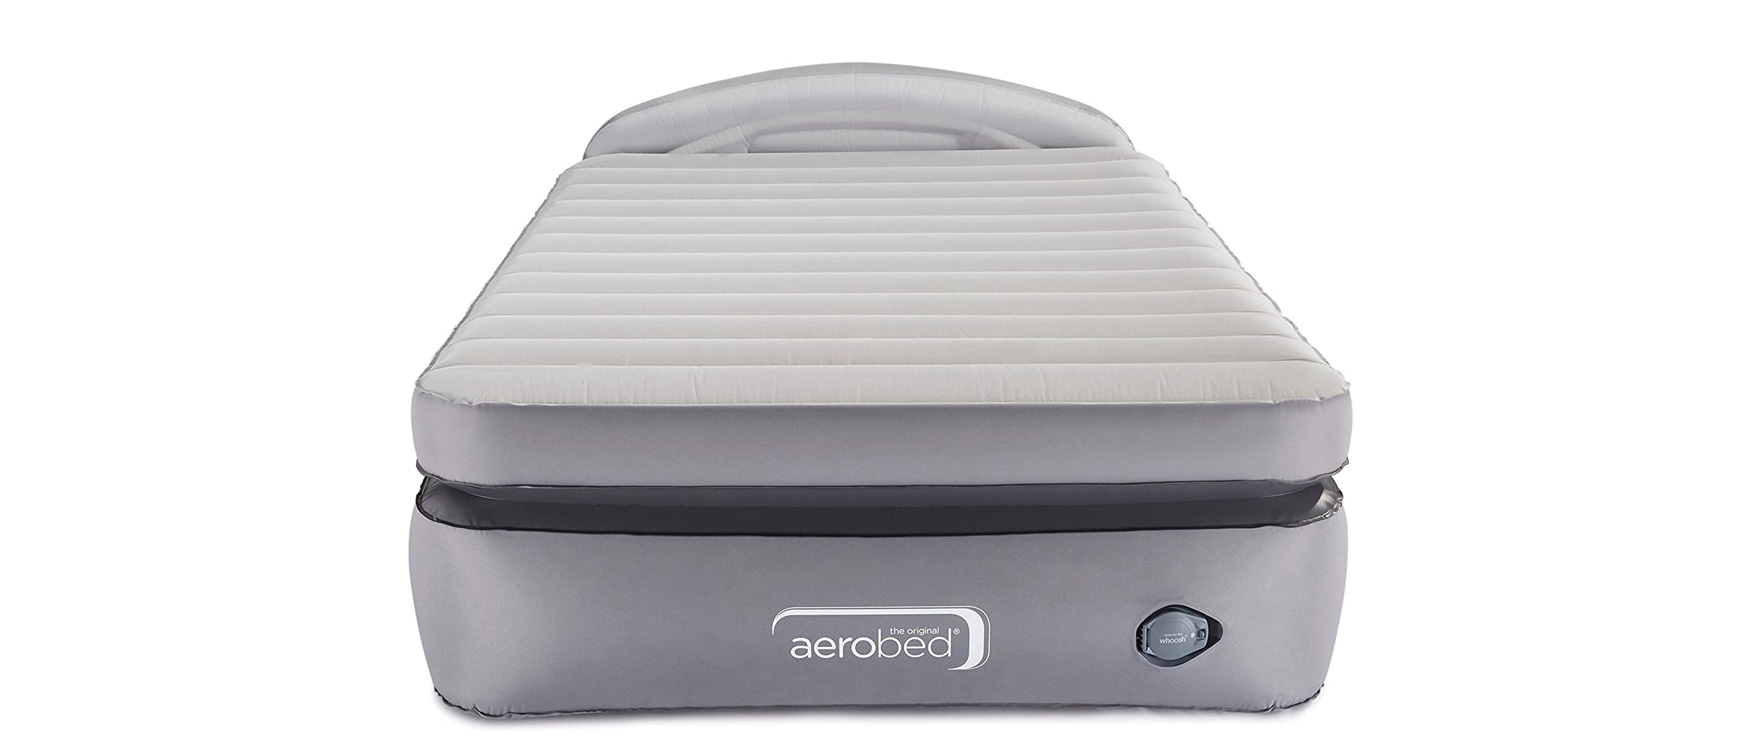 4. AEROBED COMFORT LOCK LAMINATED AIR MATTRESS WITH BUILT-IN PUMP AND HEADBOARD